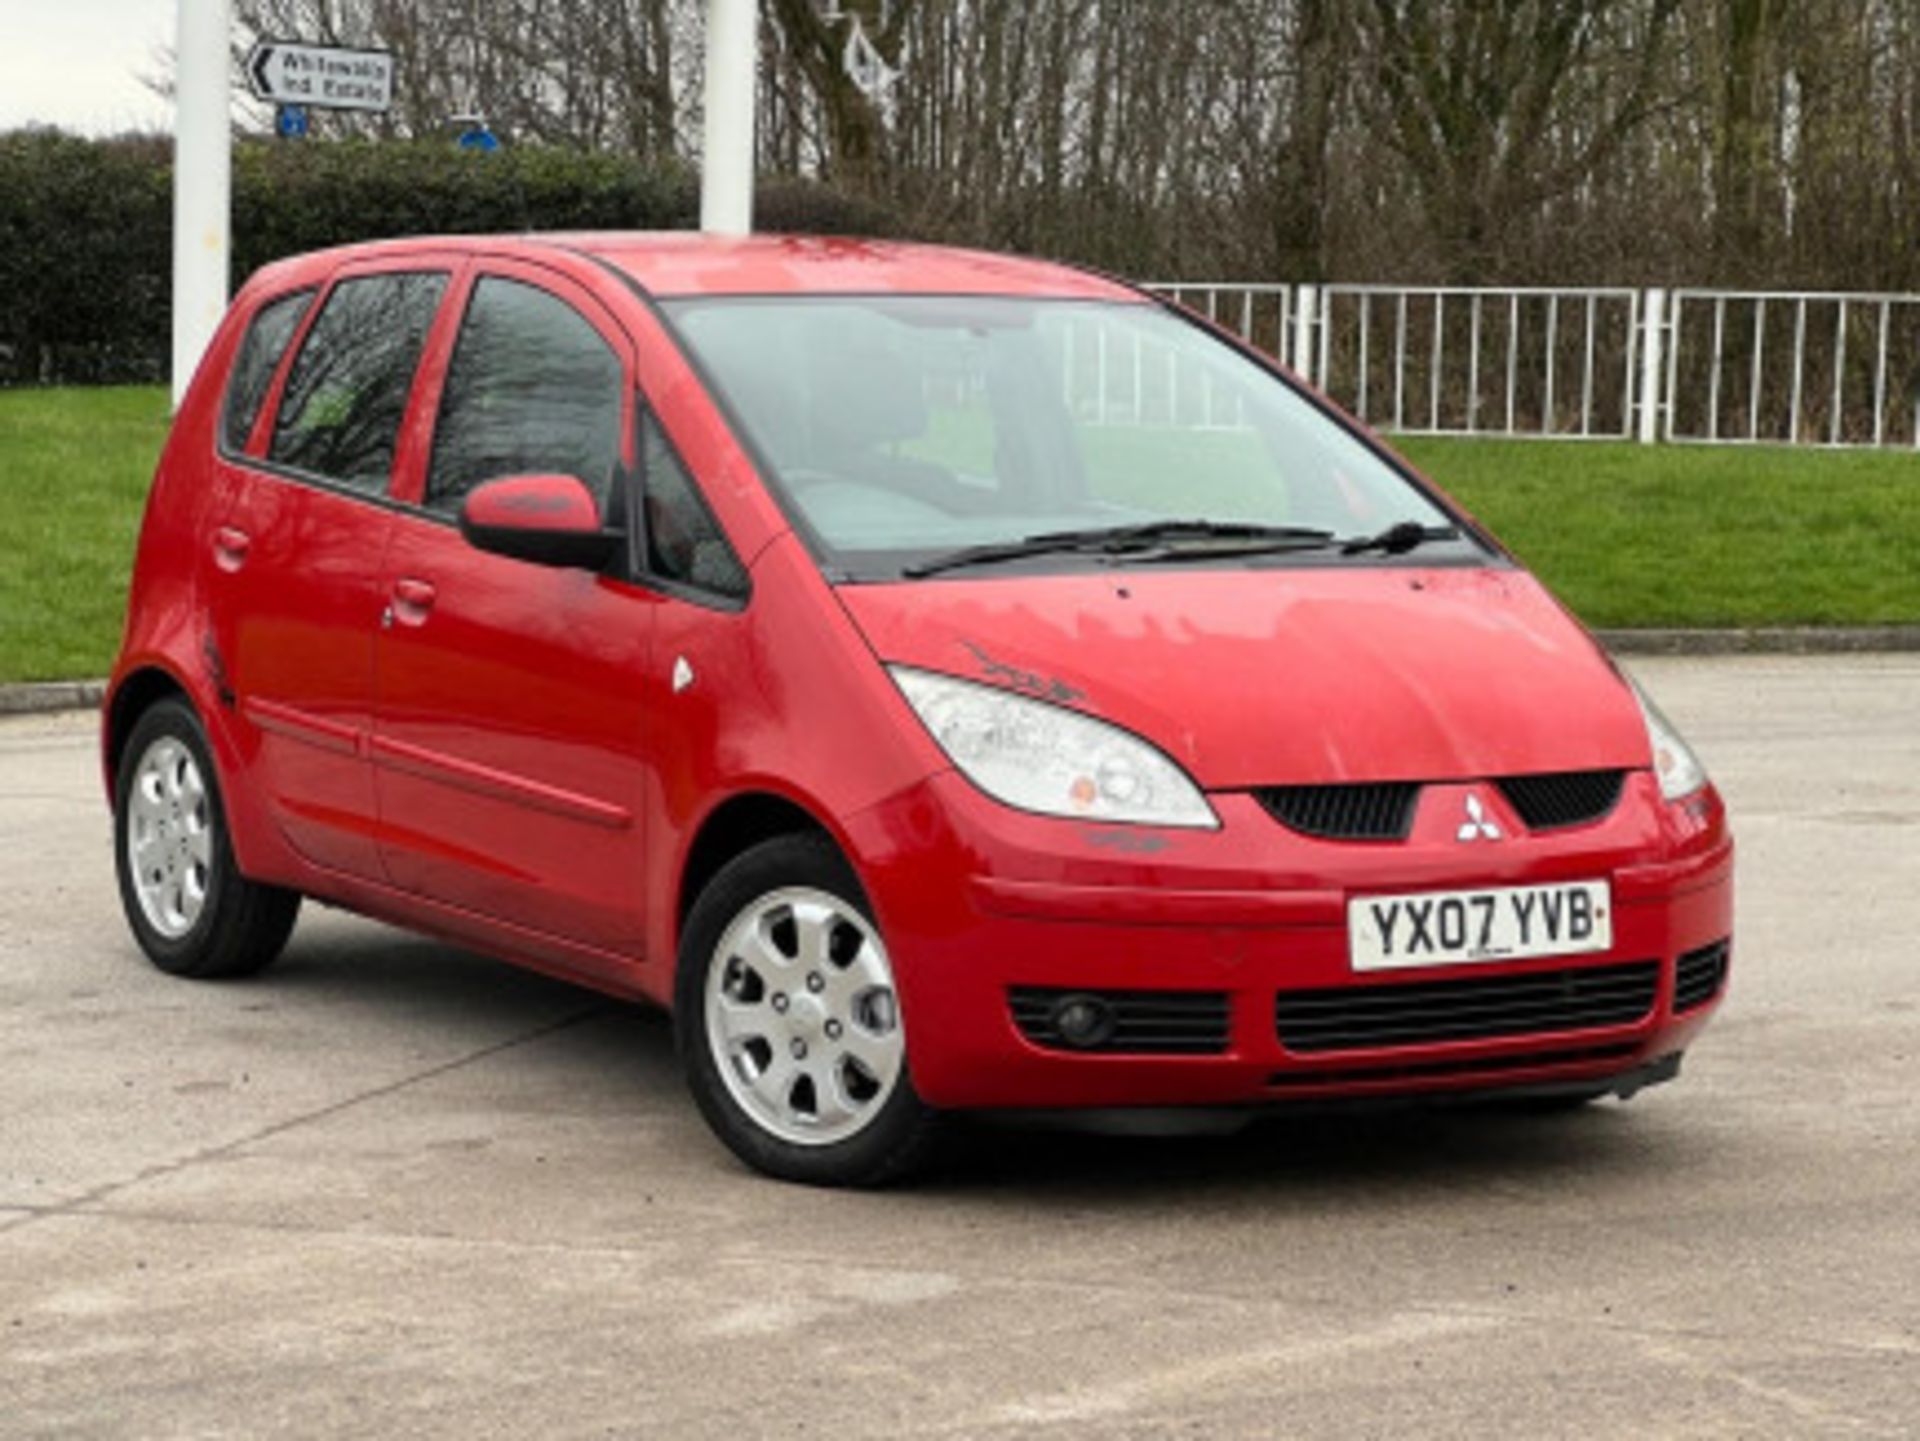 2007 MITSUBISHI COLT 1.5 DI-D DIESEL AUTOMATIC >>--NO VAT ON HAMMER--<< - Image 57 of 127